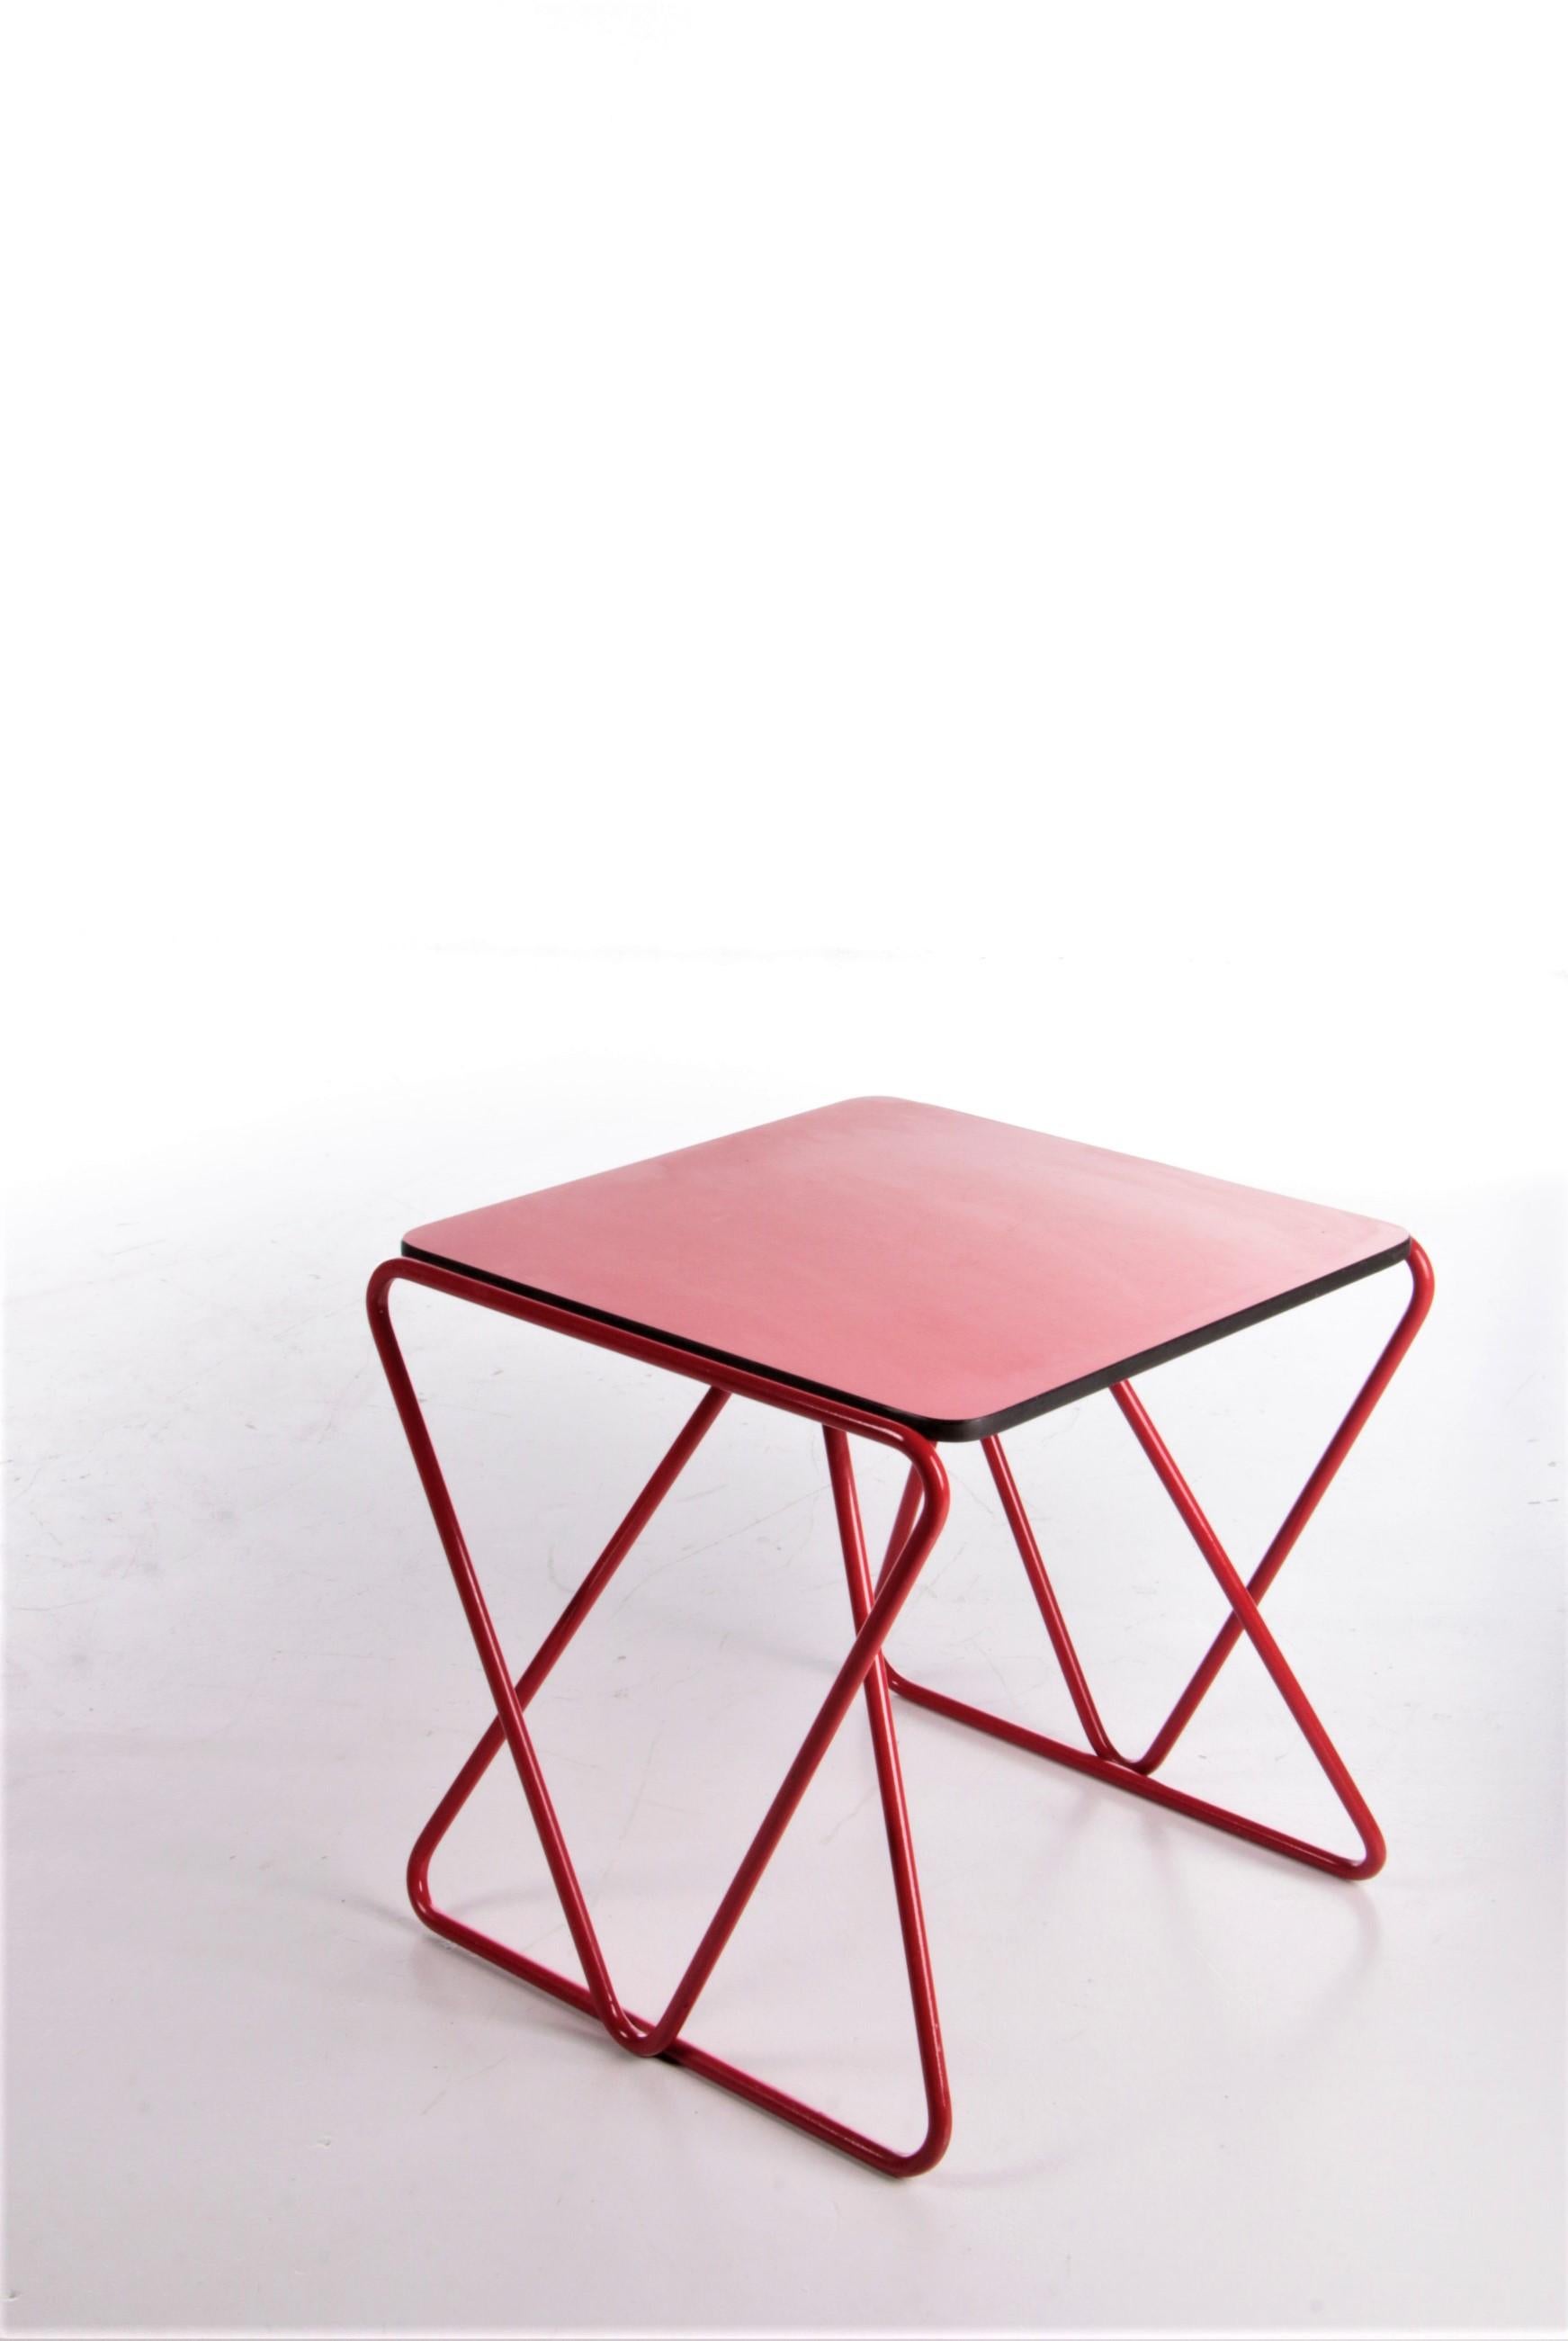 Rare Side Table Designed by Walter Antonis for I-Form, Holland, 1978 For Sale 2